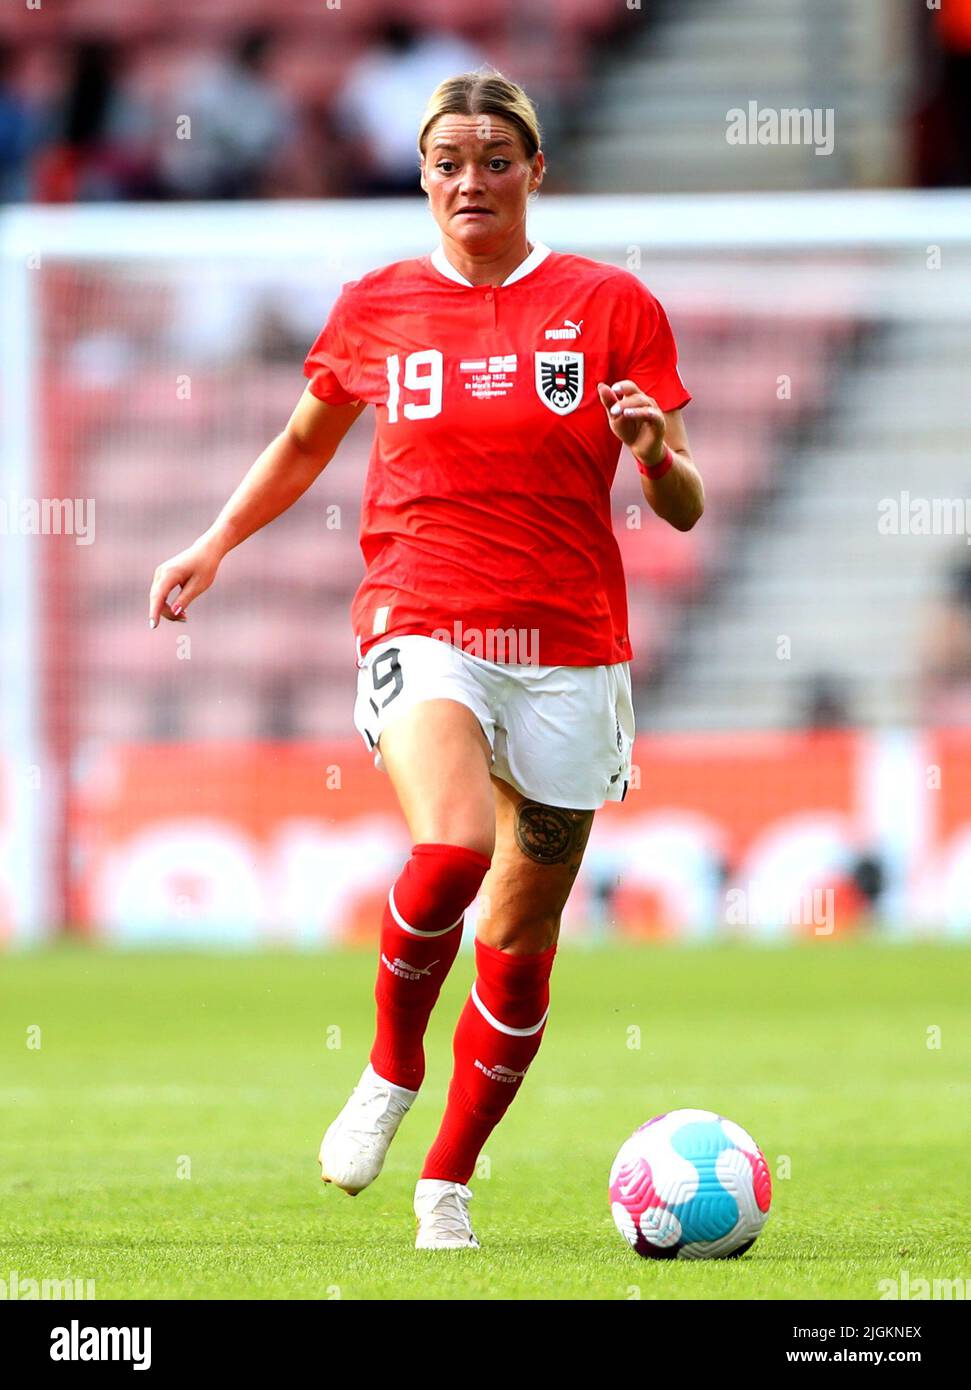 Austria's Verena Hanshaw during the UEFA Women's Euro 2022 Group A match at St Mary's Stadium, Southampton. Picture date: Monday July 11, 2022. Stock Photo